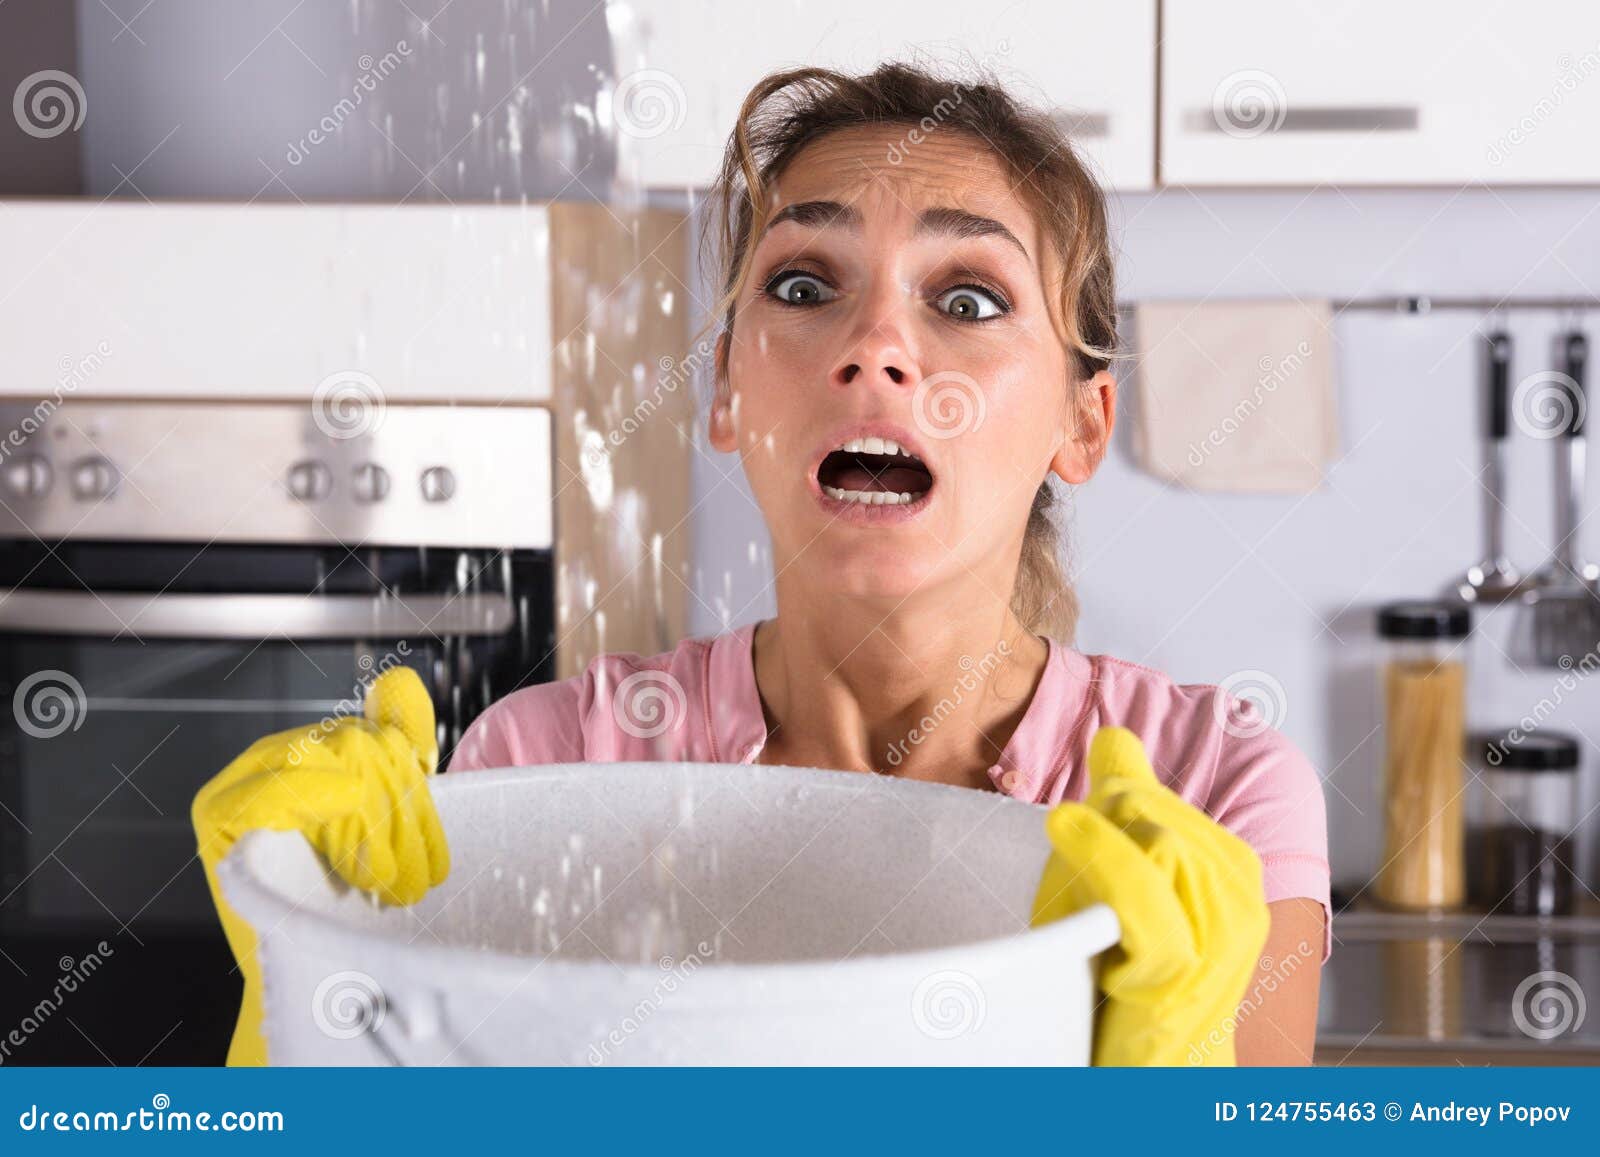 woman holding a bucket while water droplets leak from ceiling